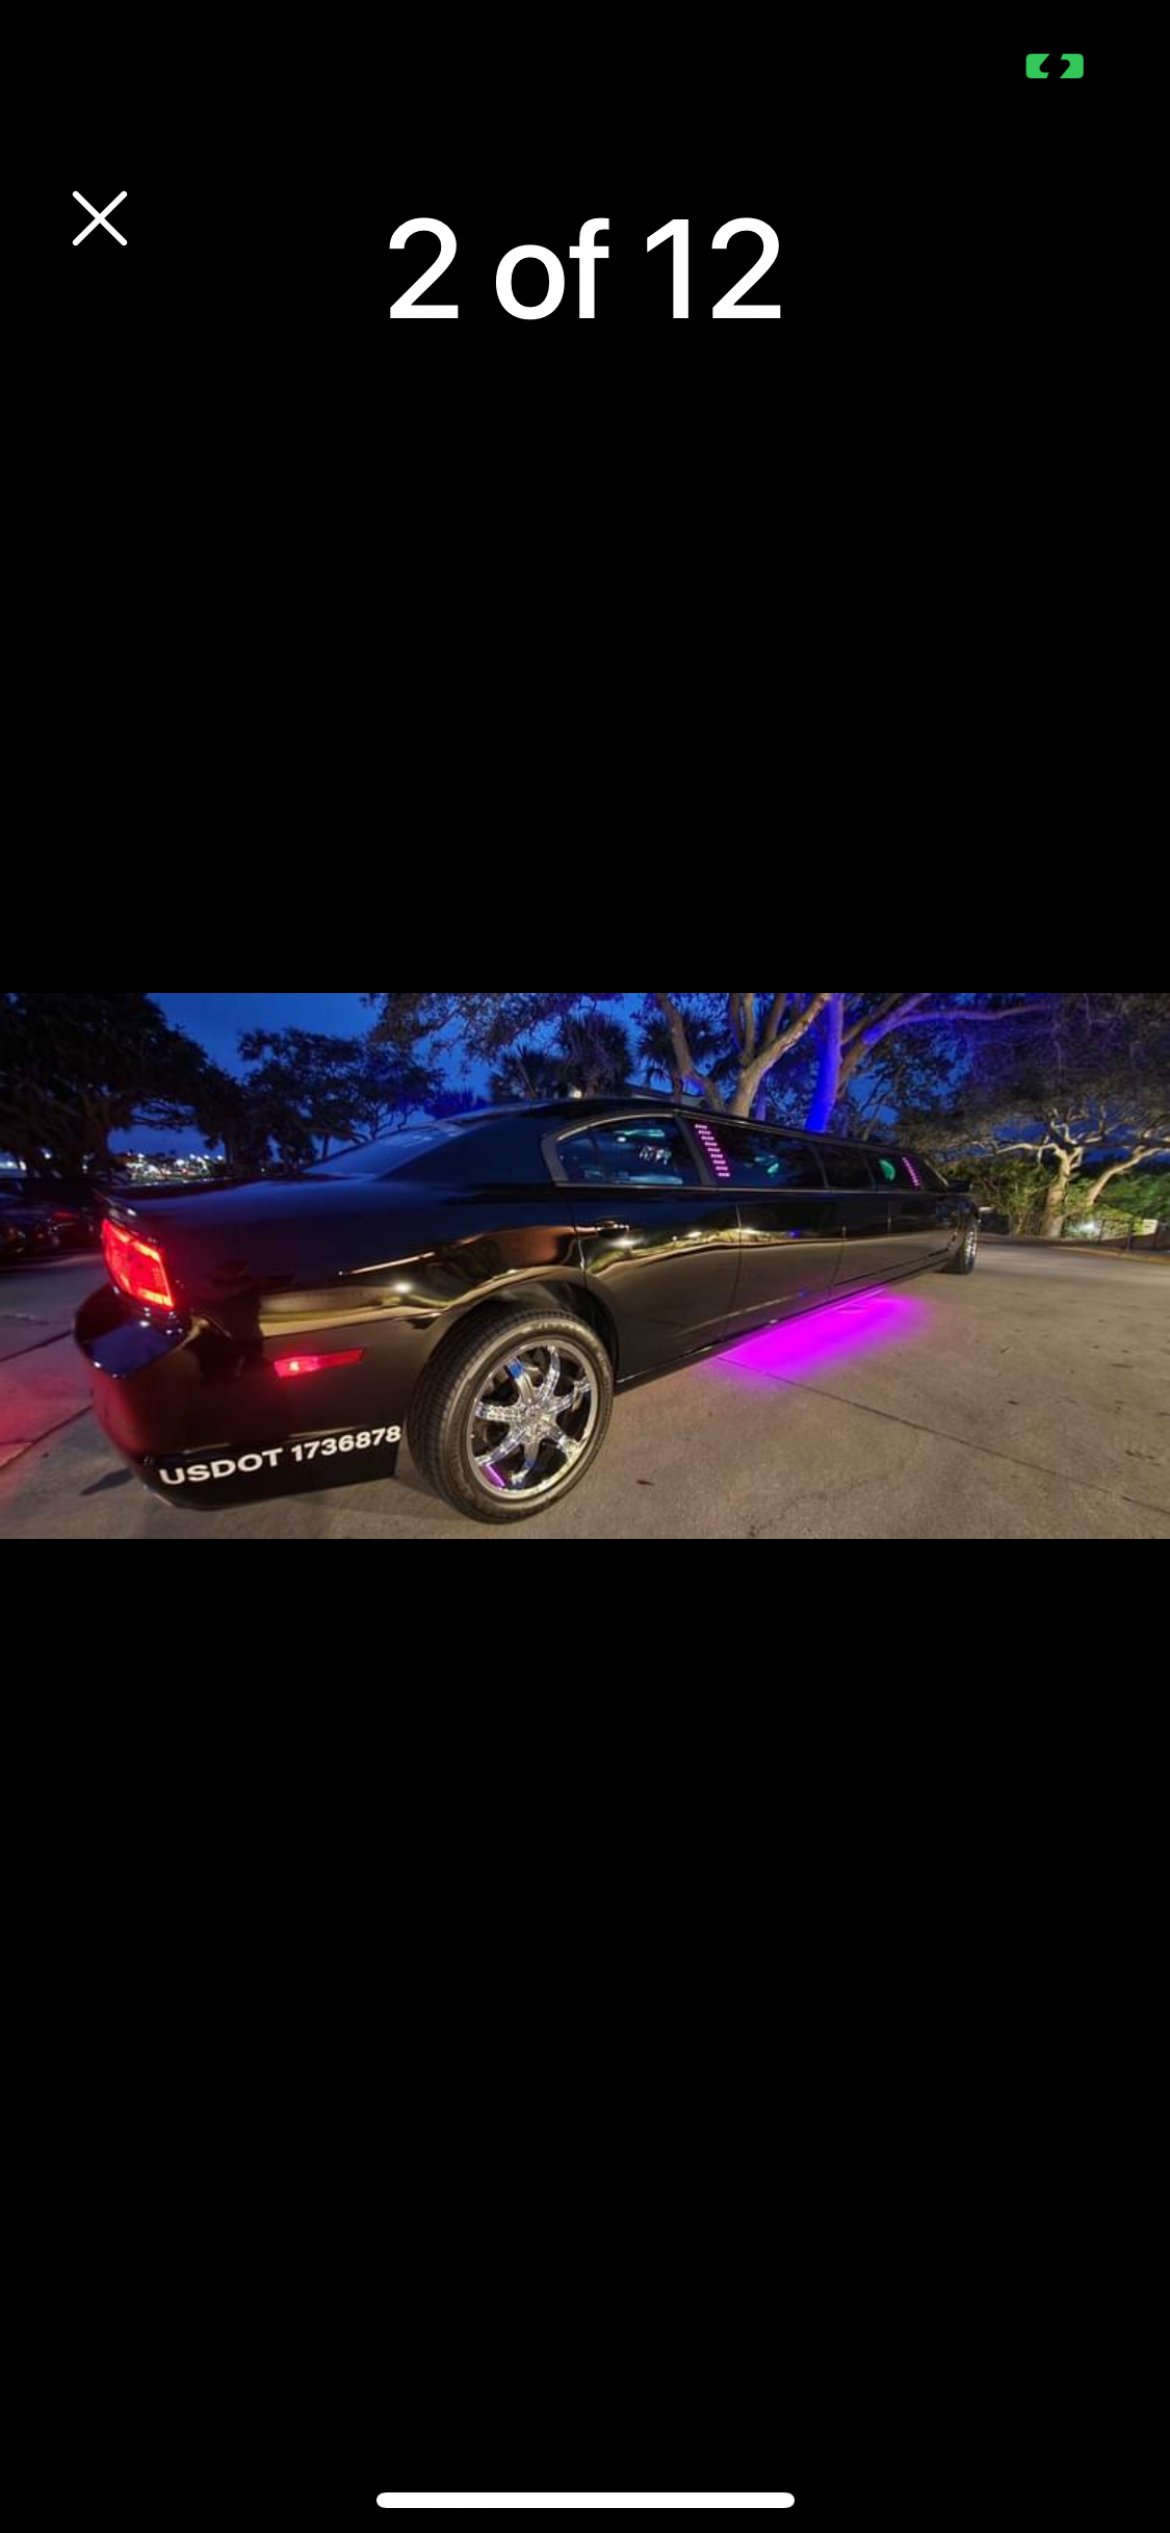 Limousine for sale: 2014 Dodge Charger 140&quot; by Pinnacle